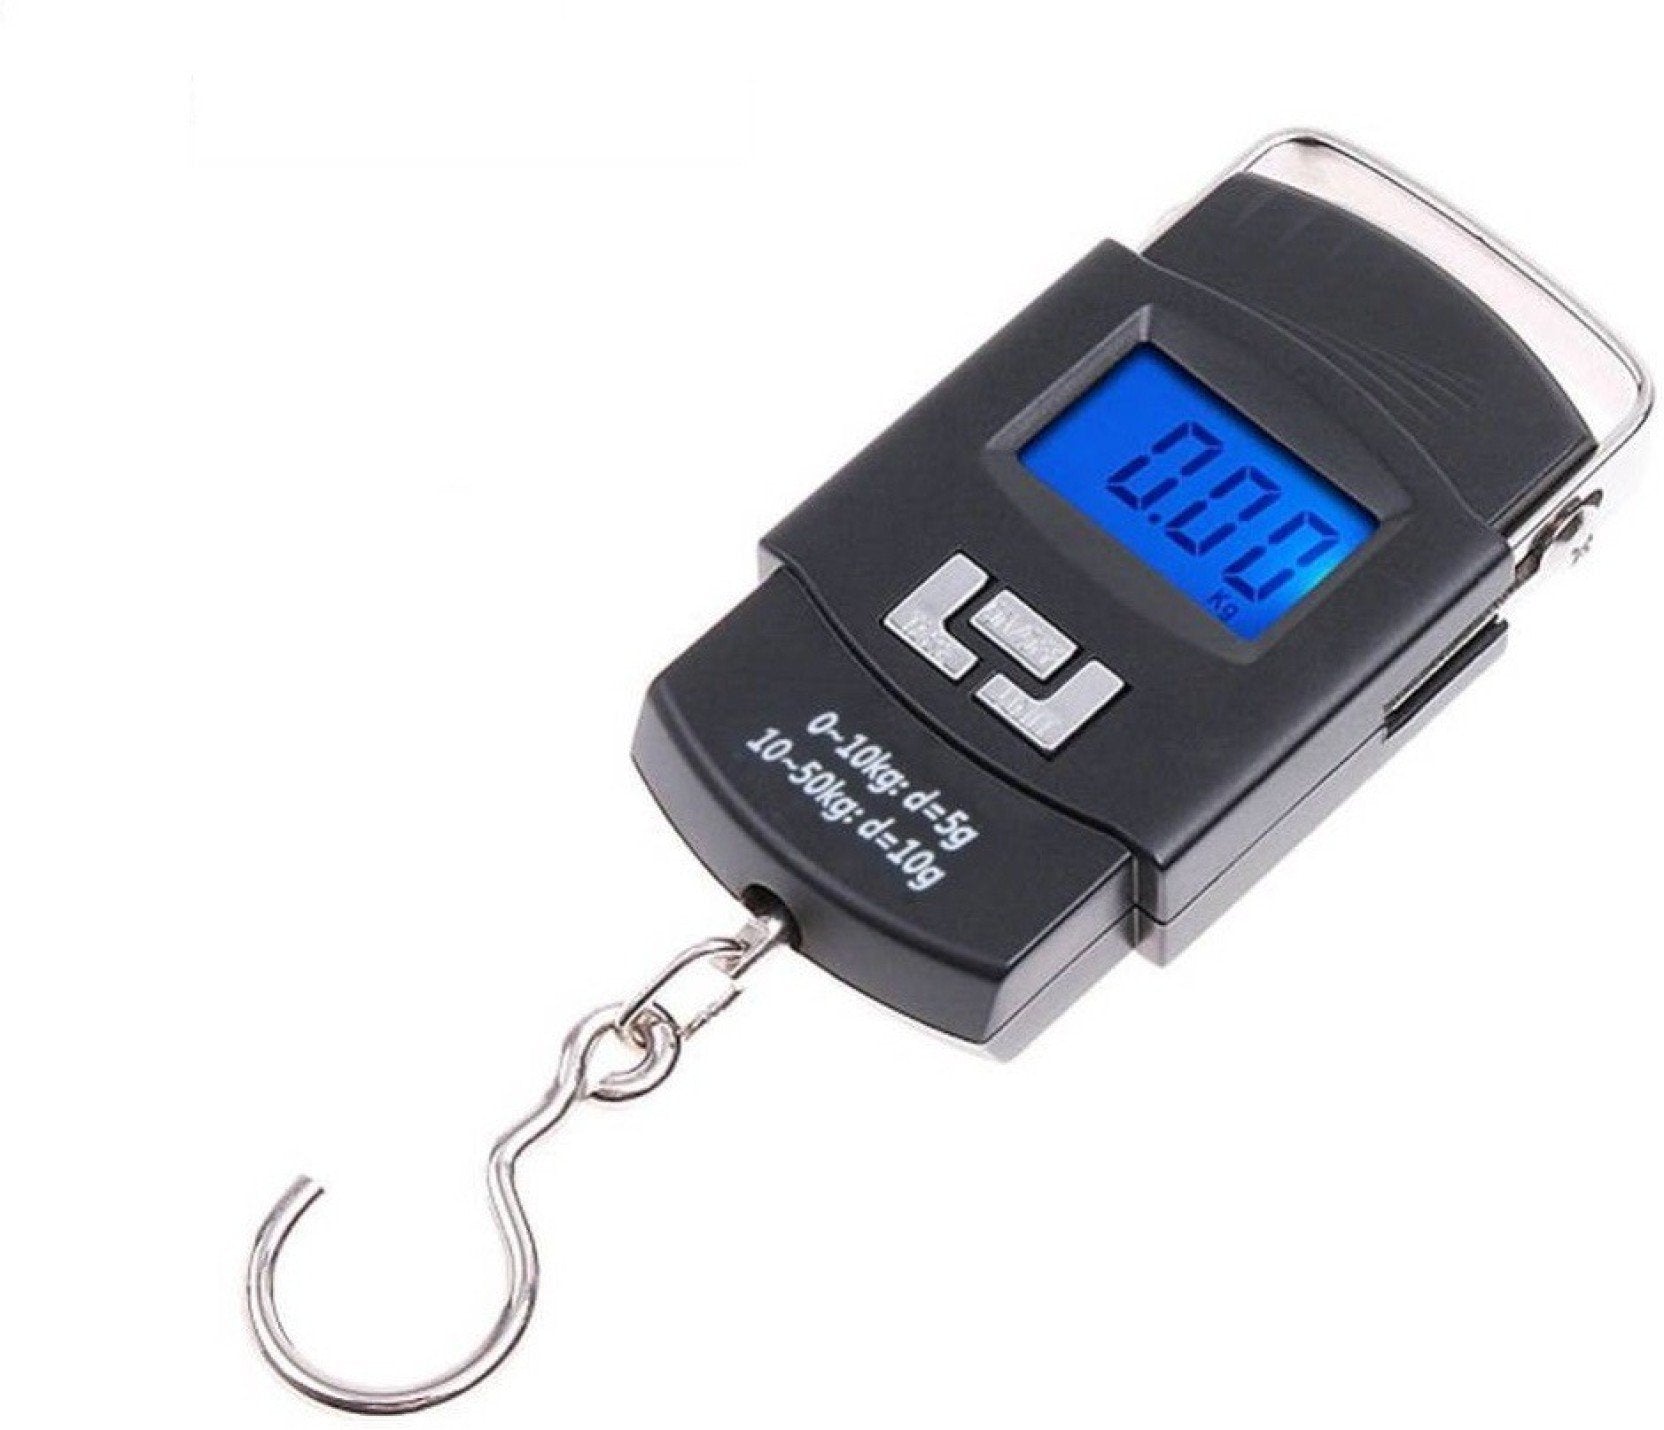 0549 Digital Portable Hook Type Weighing Scale (50 kg, Multicolor) - SkyShopy